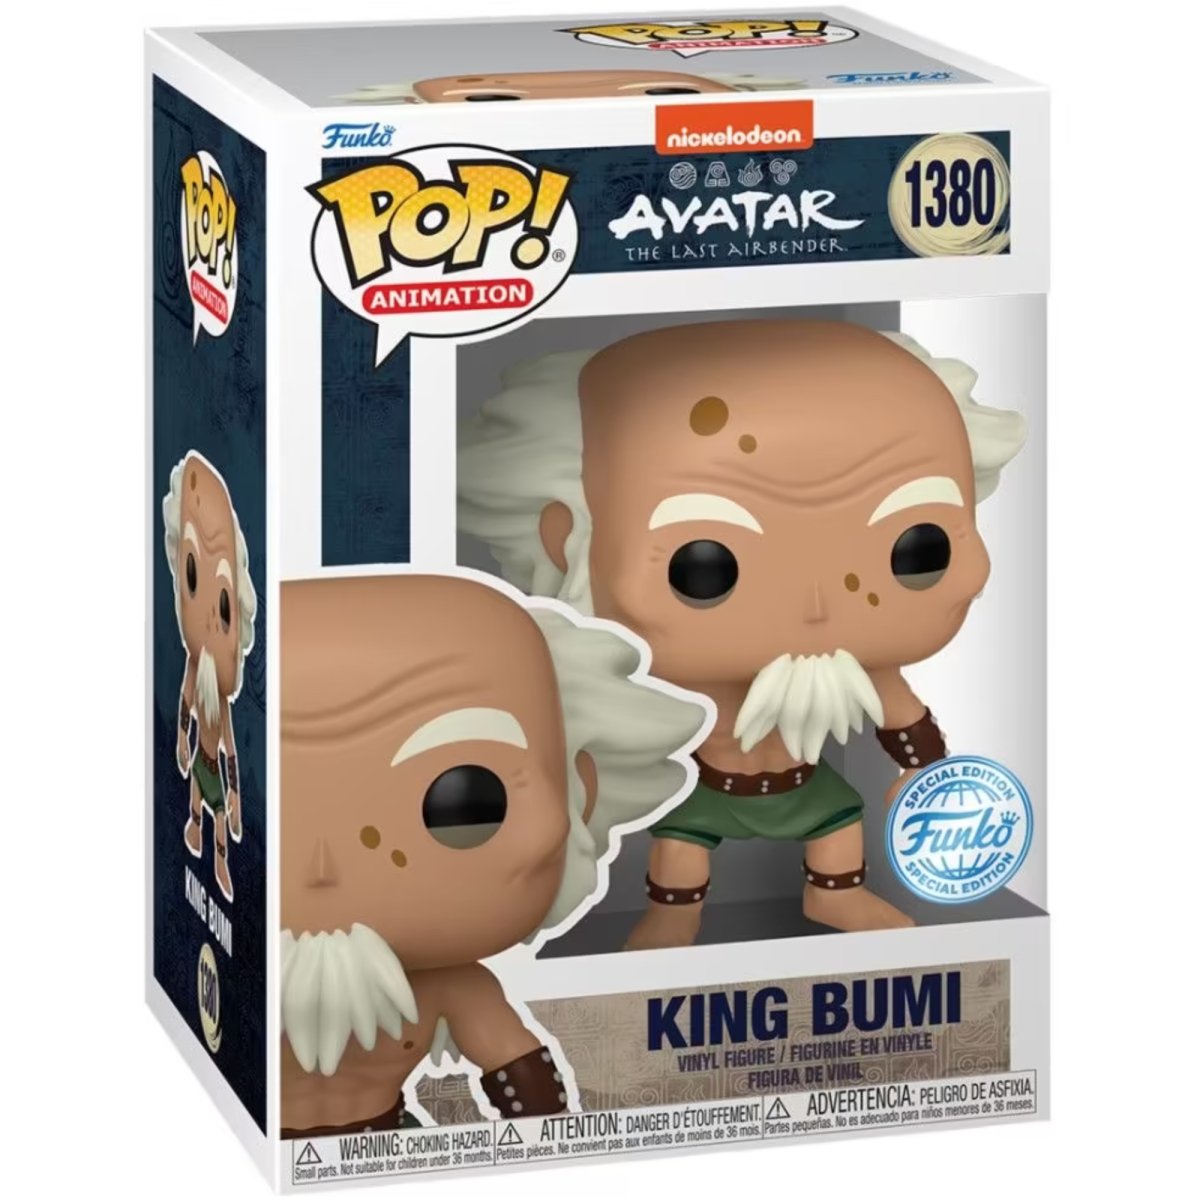 Avatar The Last Air Bender - King Bumi (Special Edition) #1380 - Funko Pop! Vinyl Anime - Persona Toys